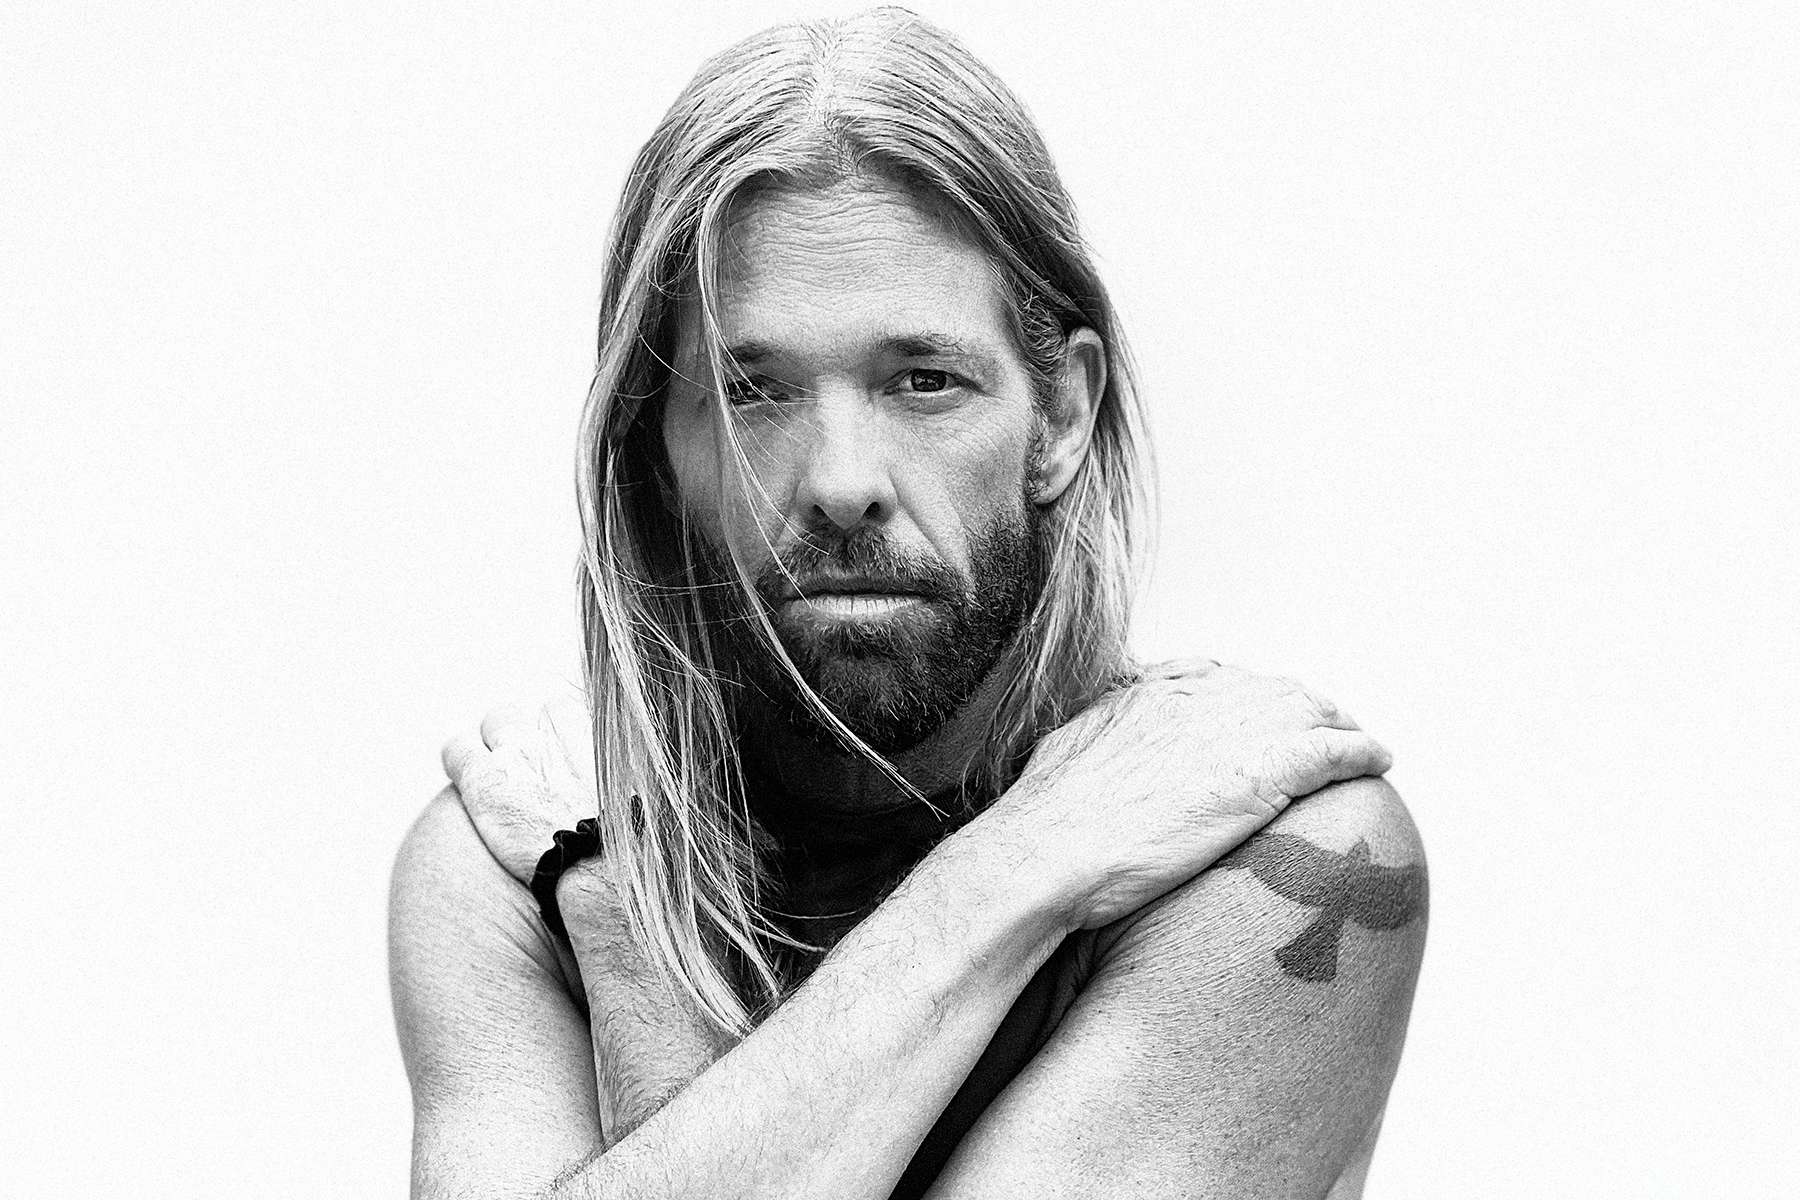 Foo Fighters Cancel Tour After Taylor Hawkins' Death